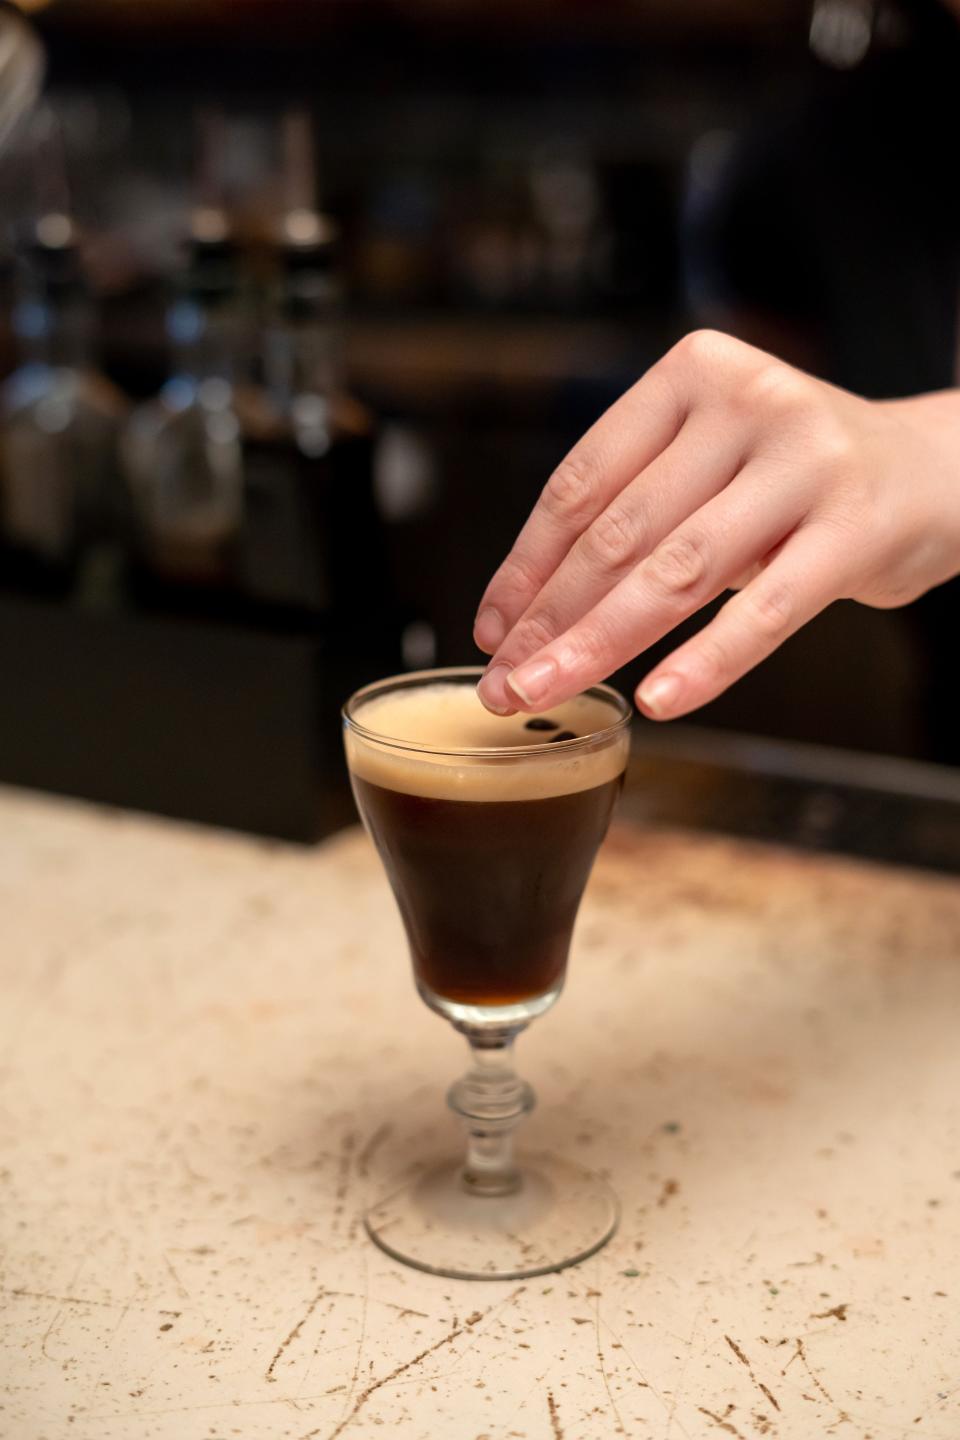 The Espresso Martini is one of the most popular drinks at The Outsider.